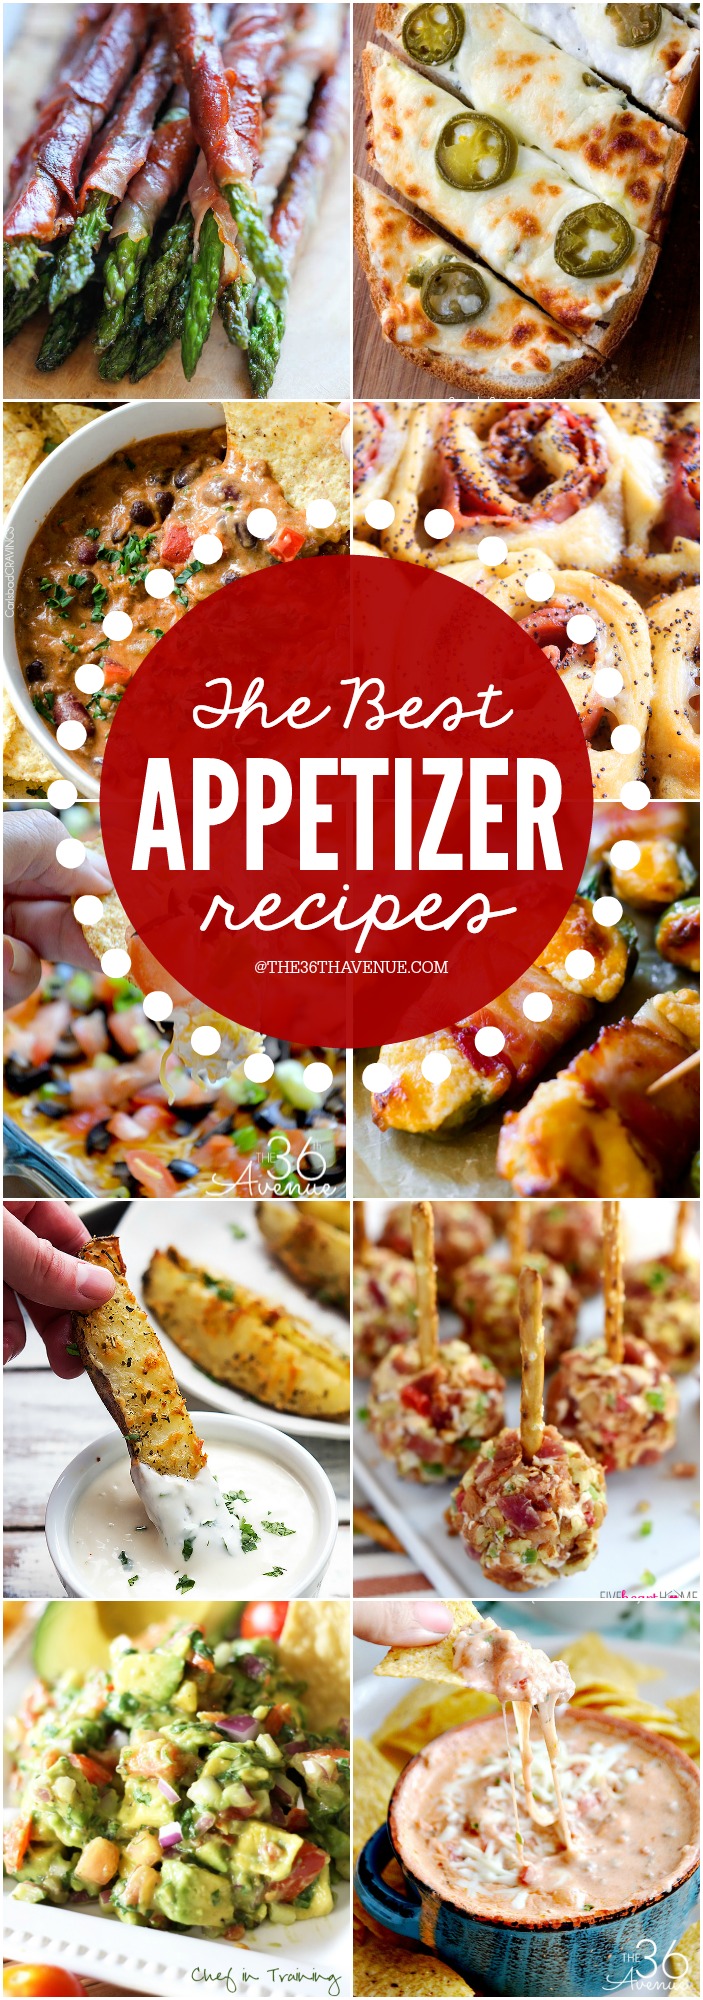 The Best Appetizer Recipes - These appetizer recipes are perfect for Christmas Parties, New Years, Birthday Parties, or any time that you are craving a yummy bite! These are so darn good! PIN IT NOW and make them later!